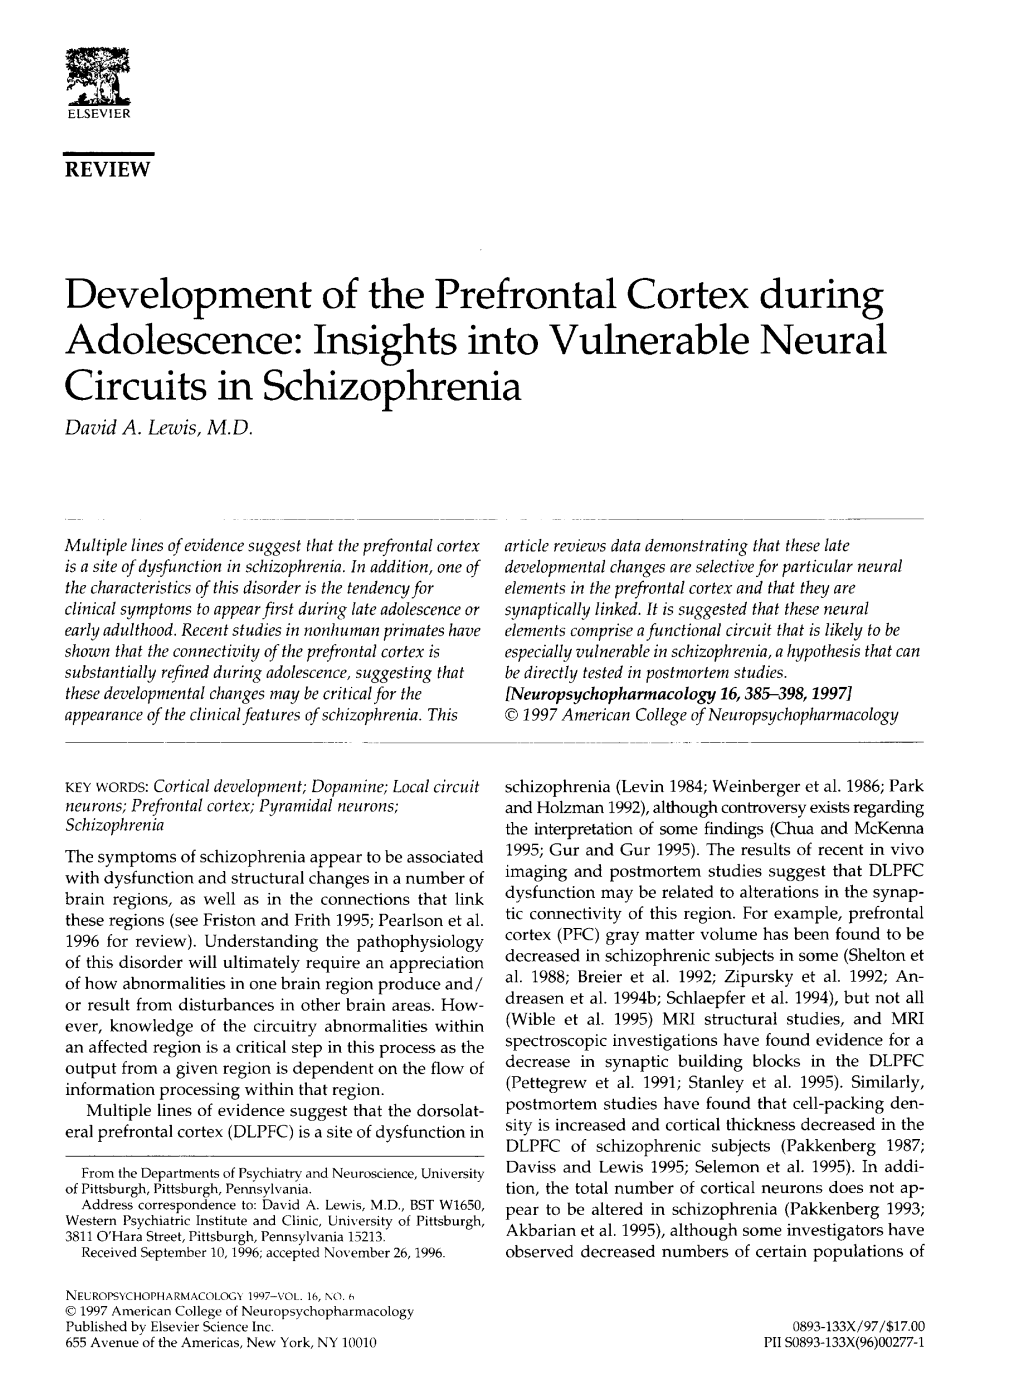 Development of the Prefrontal Cortex During Adolescence: Insights Into Vulnerable Neural Circuits in Schizophrenia David A